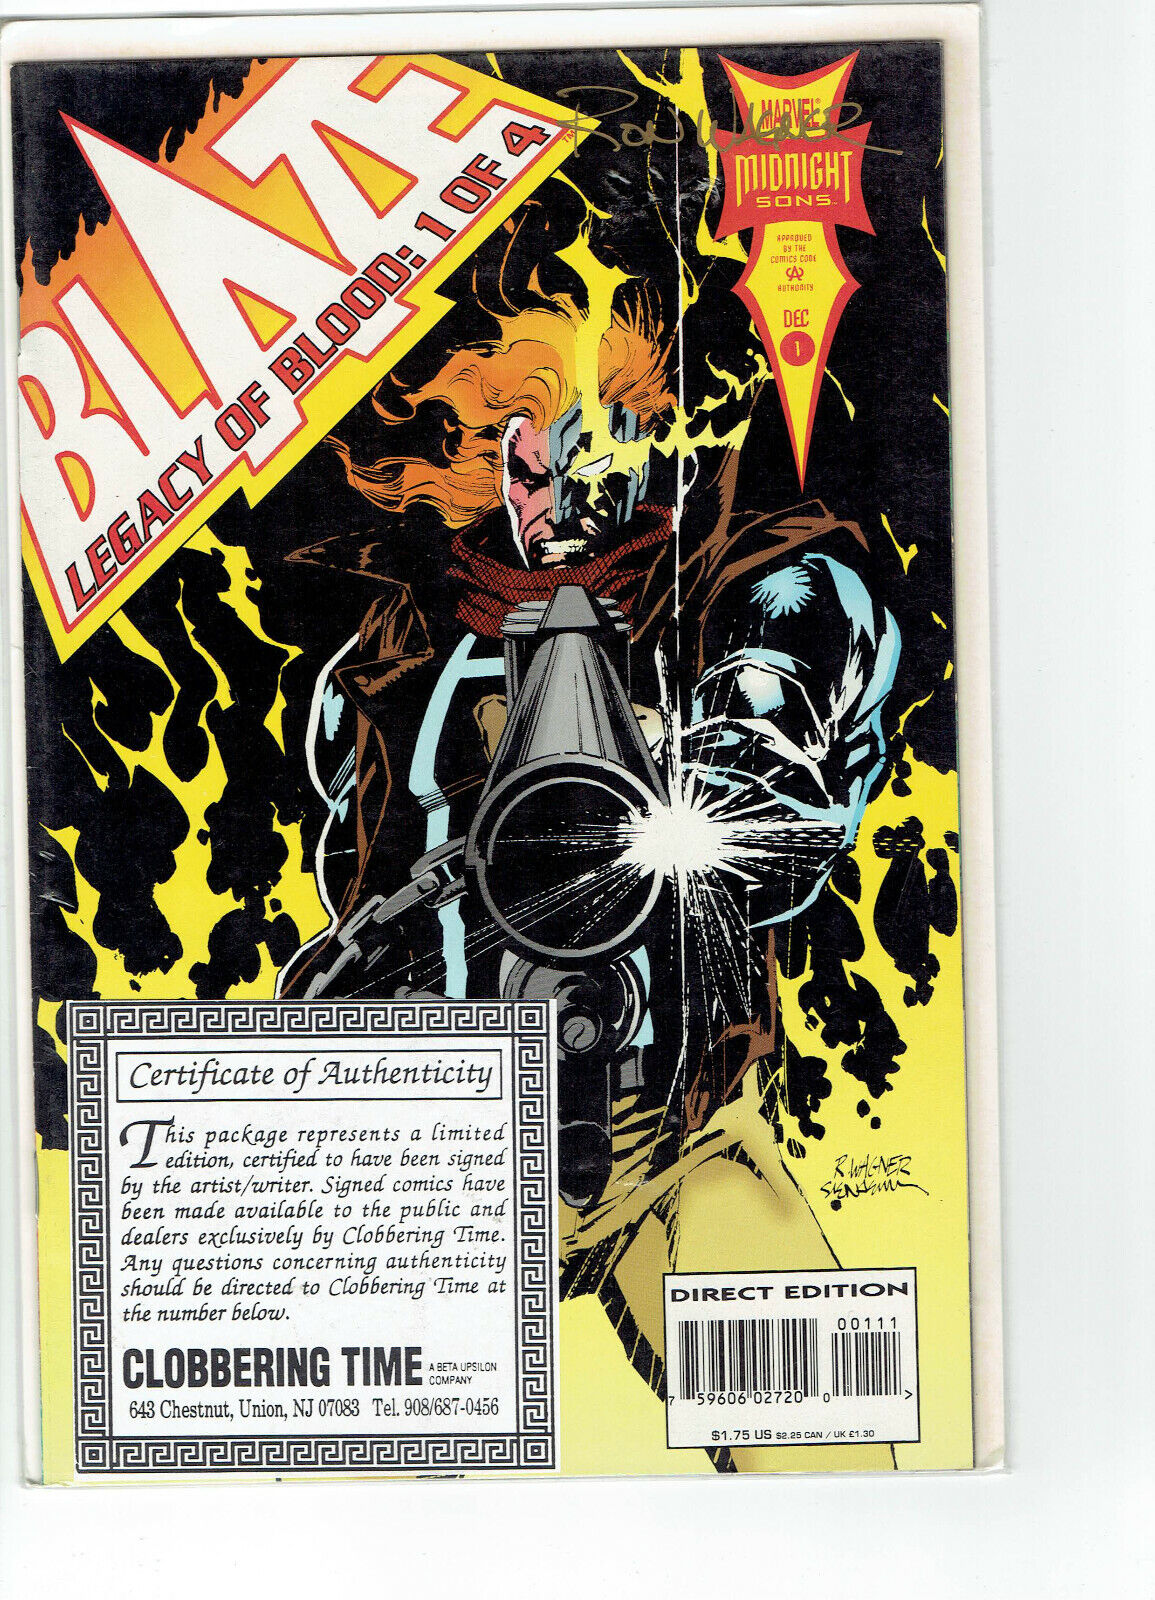 Blaze Legacy of Blood: #1 NM+ signed by Ron Wagner